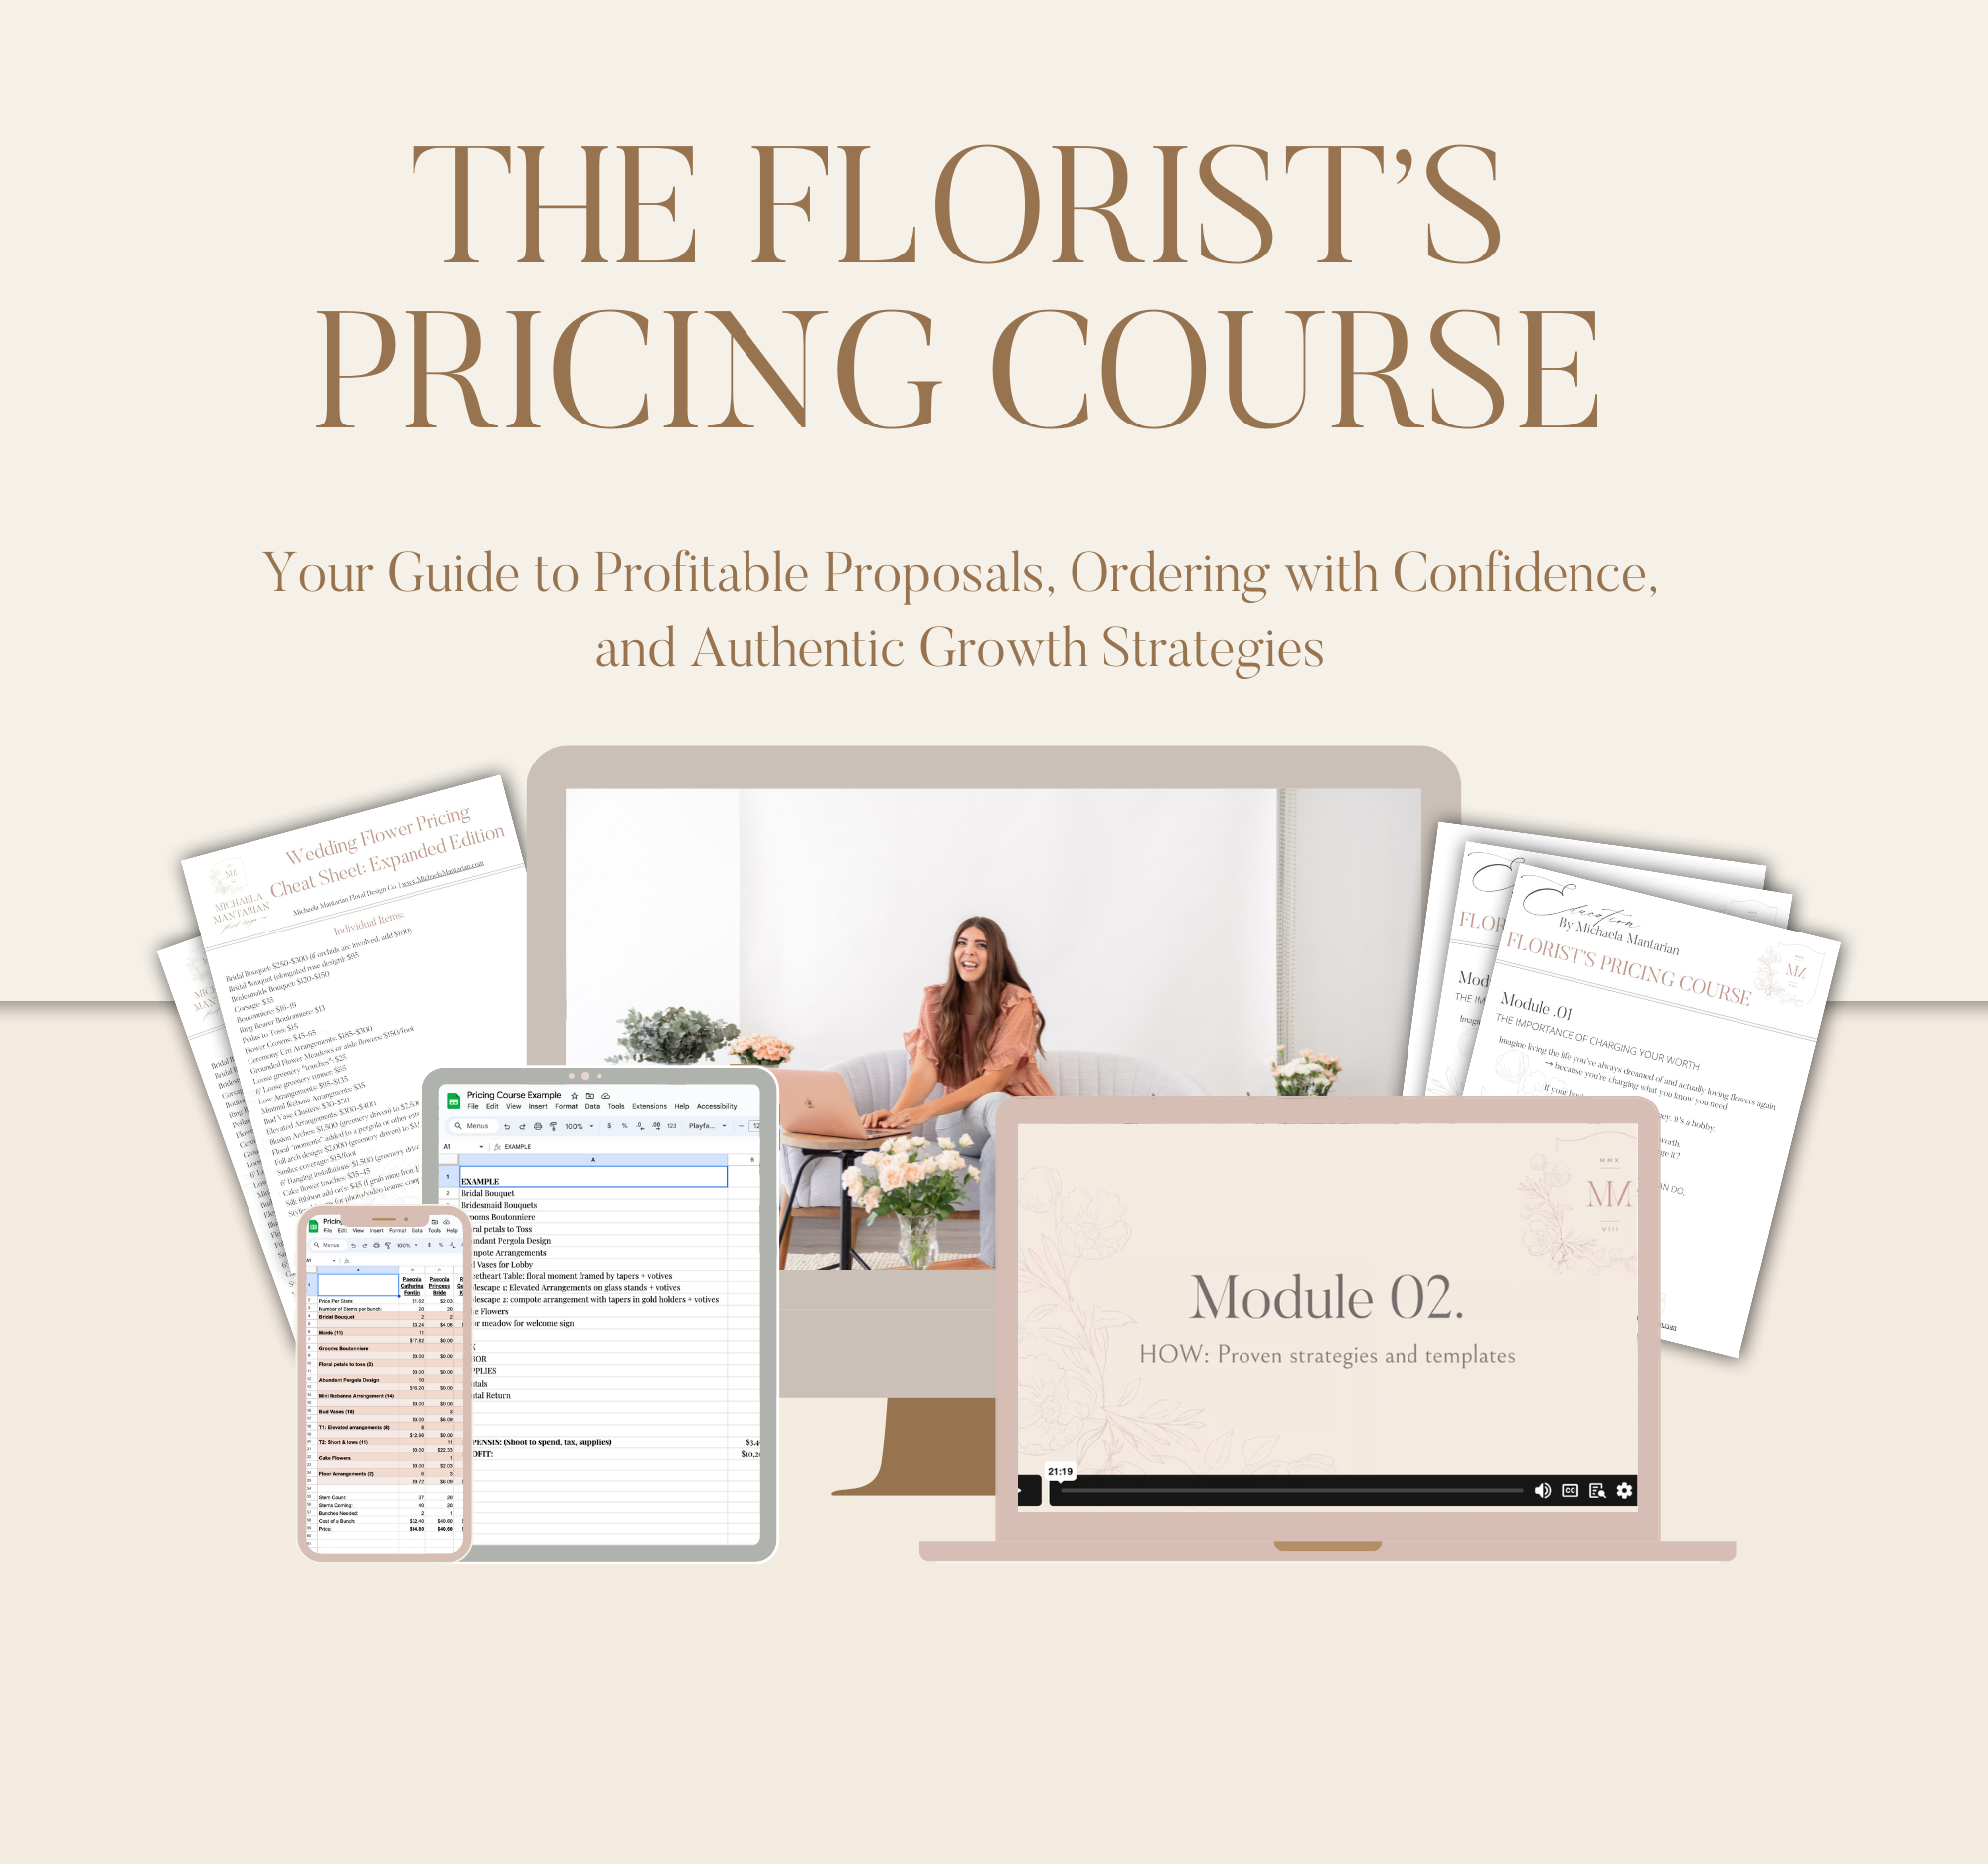 Picture of a florist and flowers that reads, “Learn pricing from a 6-figure florist with The Florist’s Pricing Course: Your Guide to Profitable Proposals, Ordering with Confidence, and Authentic Growth Strategies.”